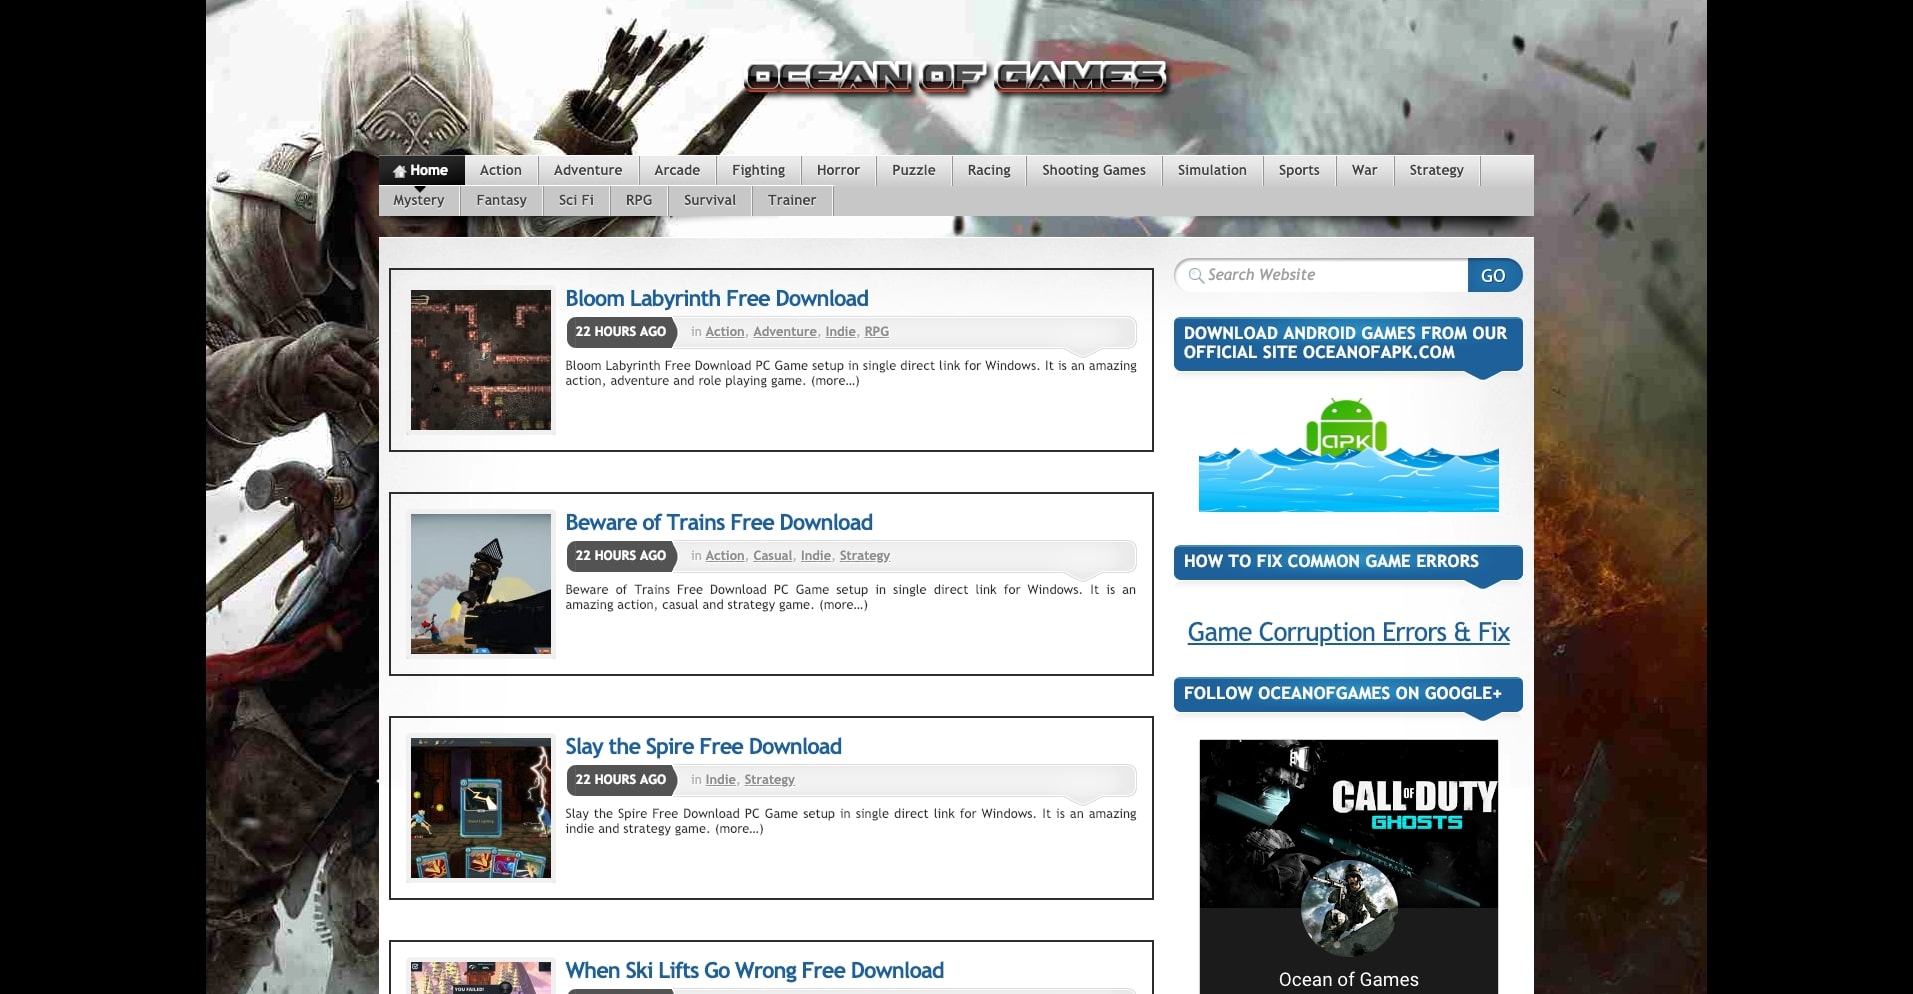 10 Best Websites To Download Paid PC Games For Free And Legally in